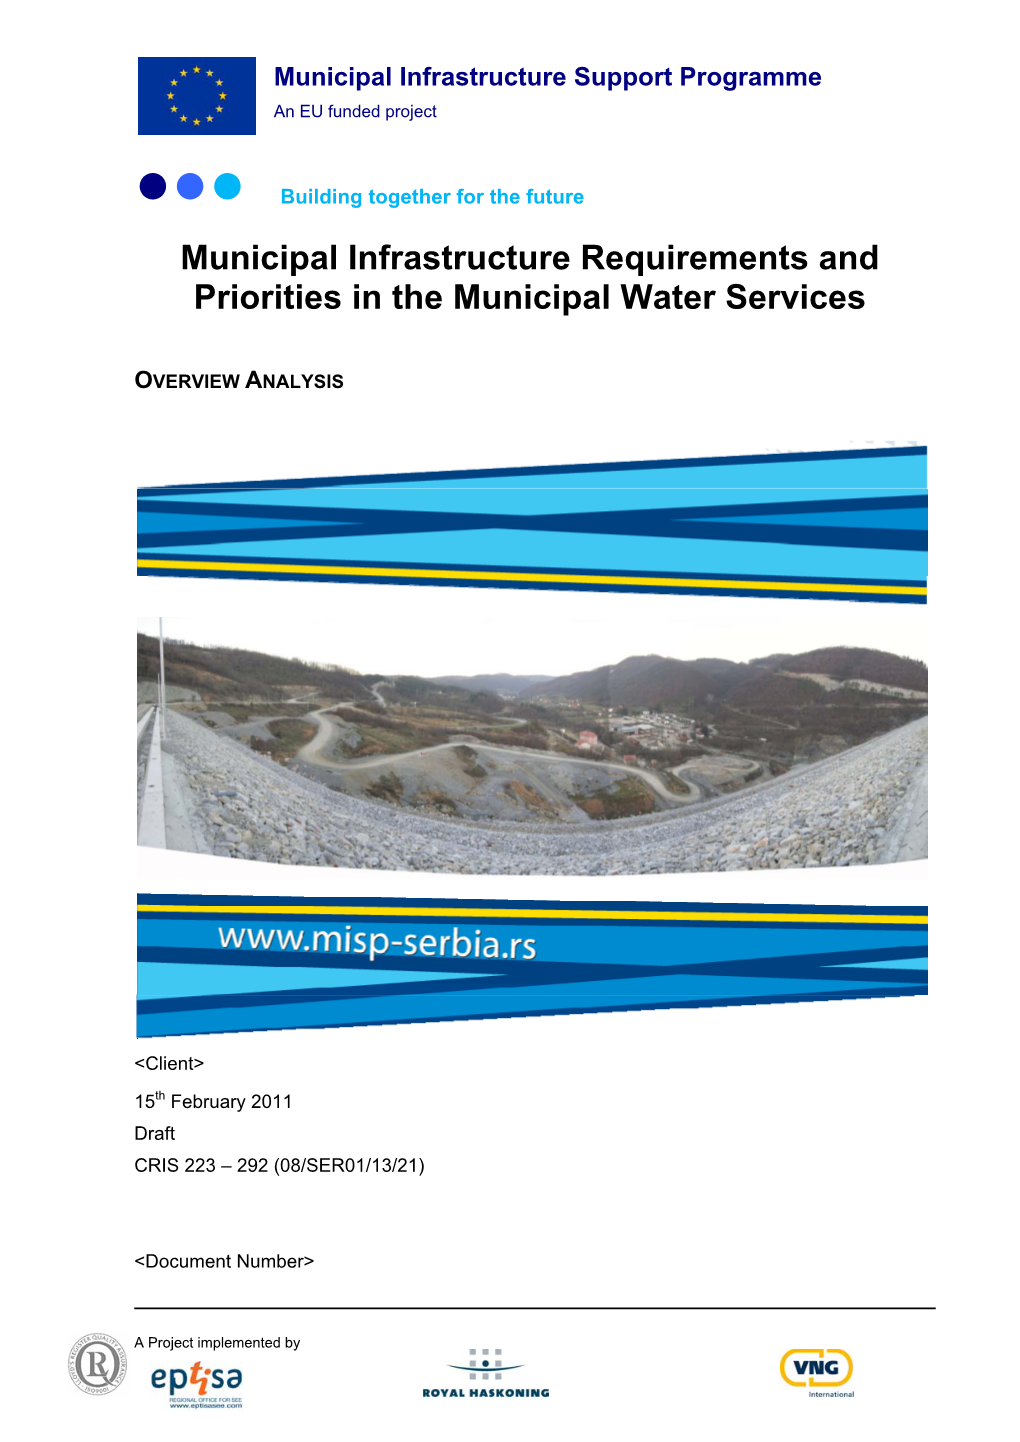 Building Together for the Future Municipal Infrastructure Requirements and Priorities in the Municipal Water Services